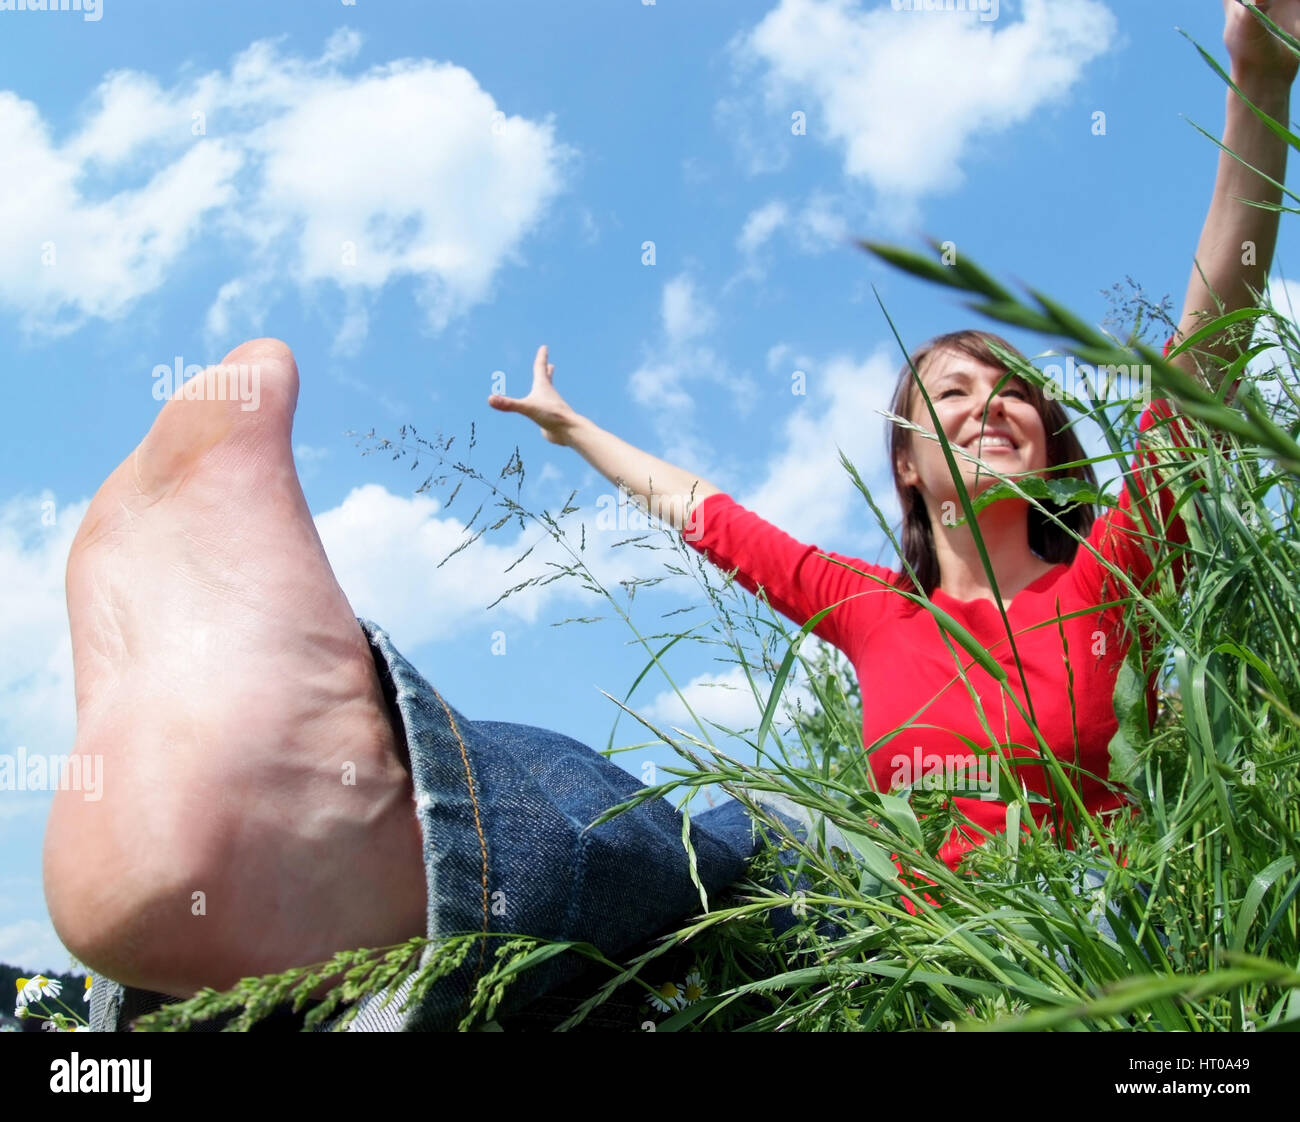 Junge Frau erholt sich in der Natur - woman relaxing in nature Stock Photo